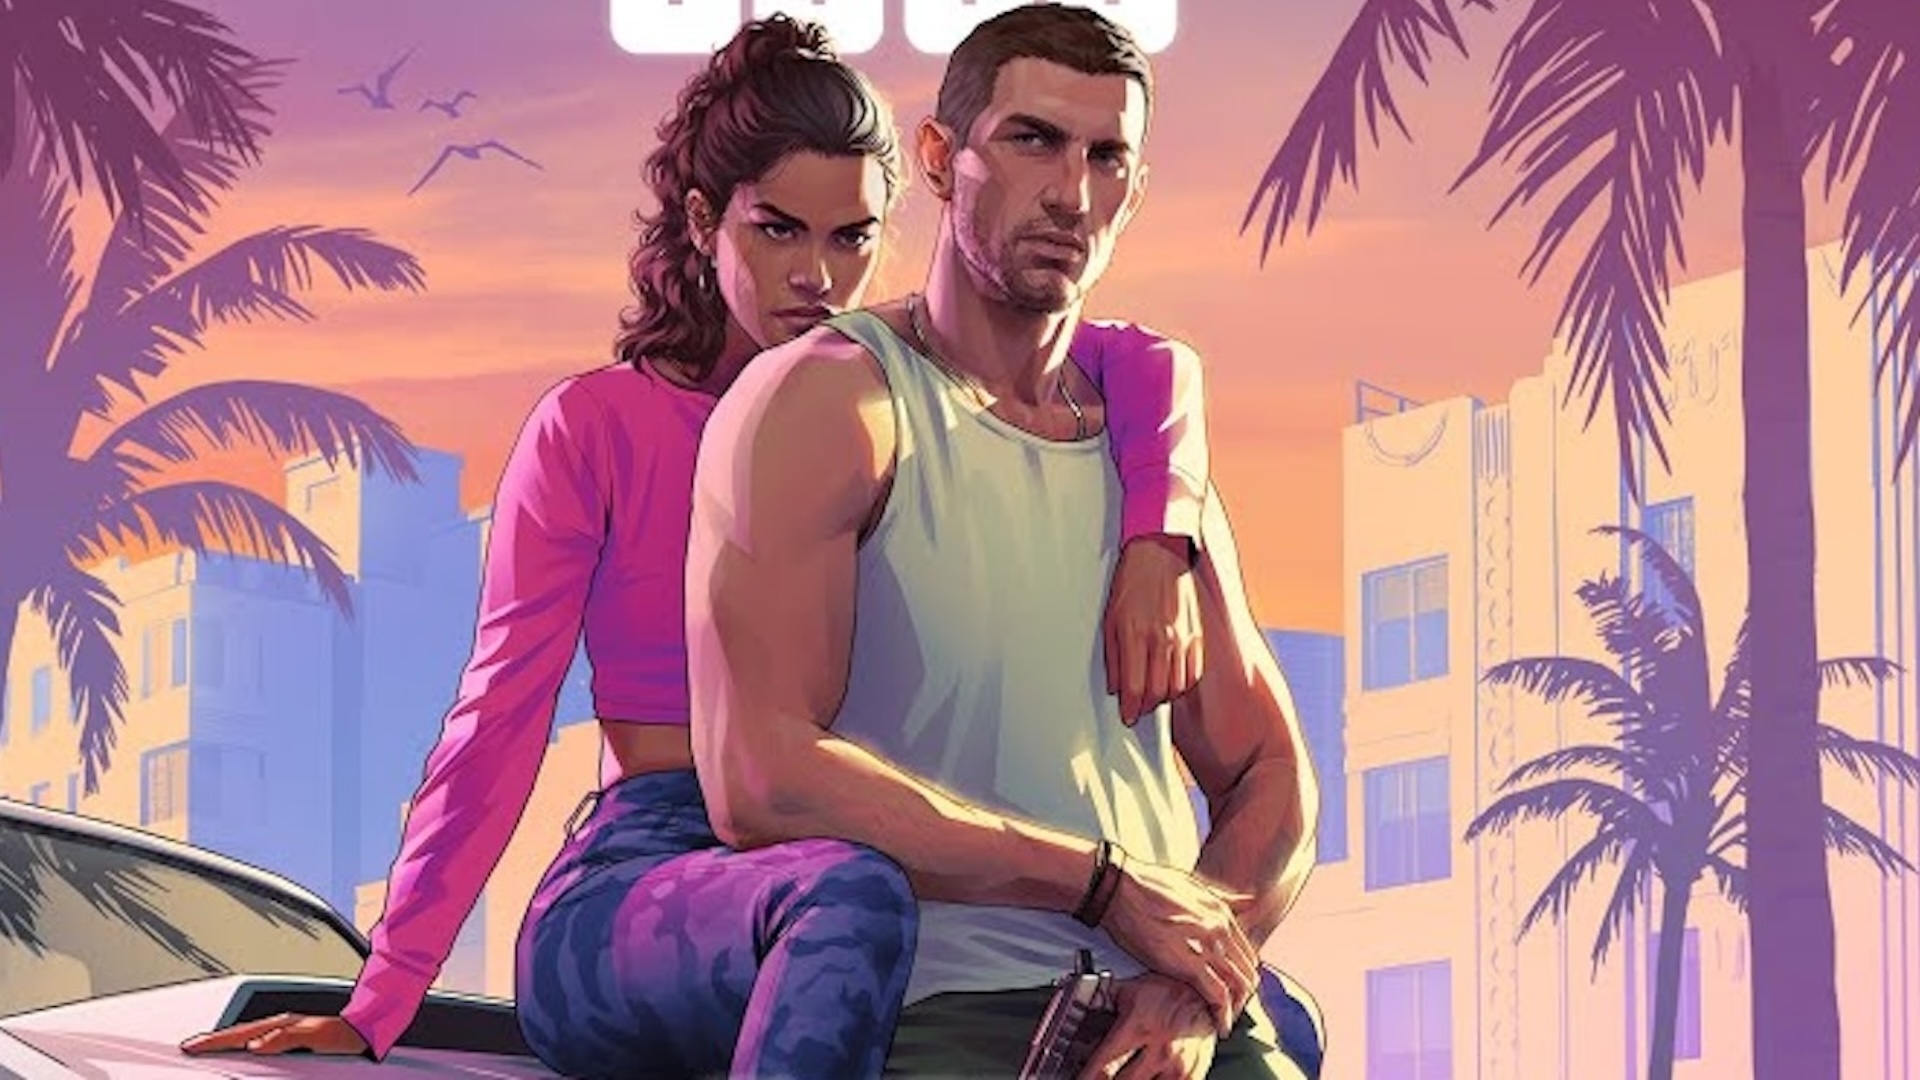 GTA 6 Price, Release Date And Trailer Likely Today: What To Expect From  Rockstar Games' GTA 5 Successor